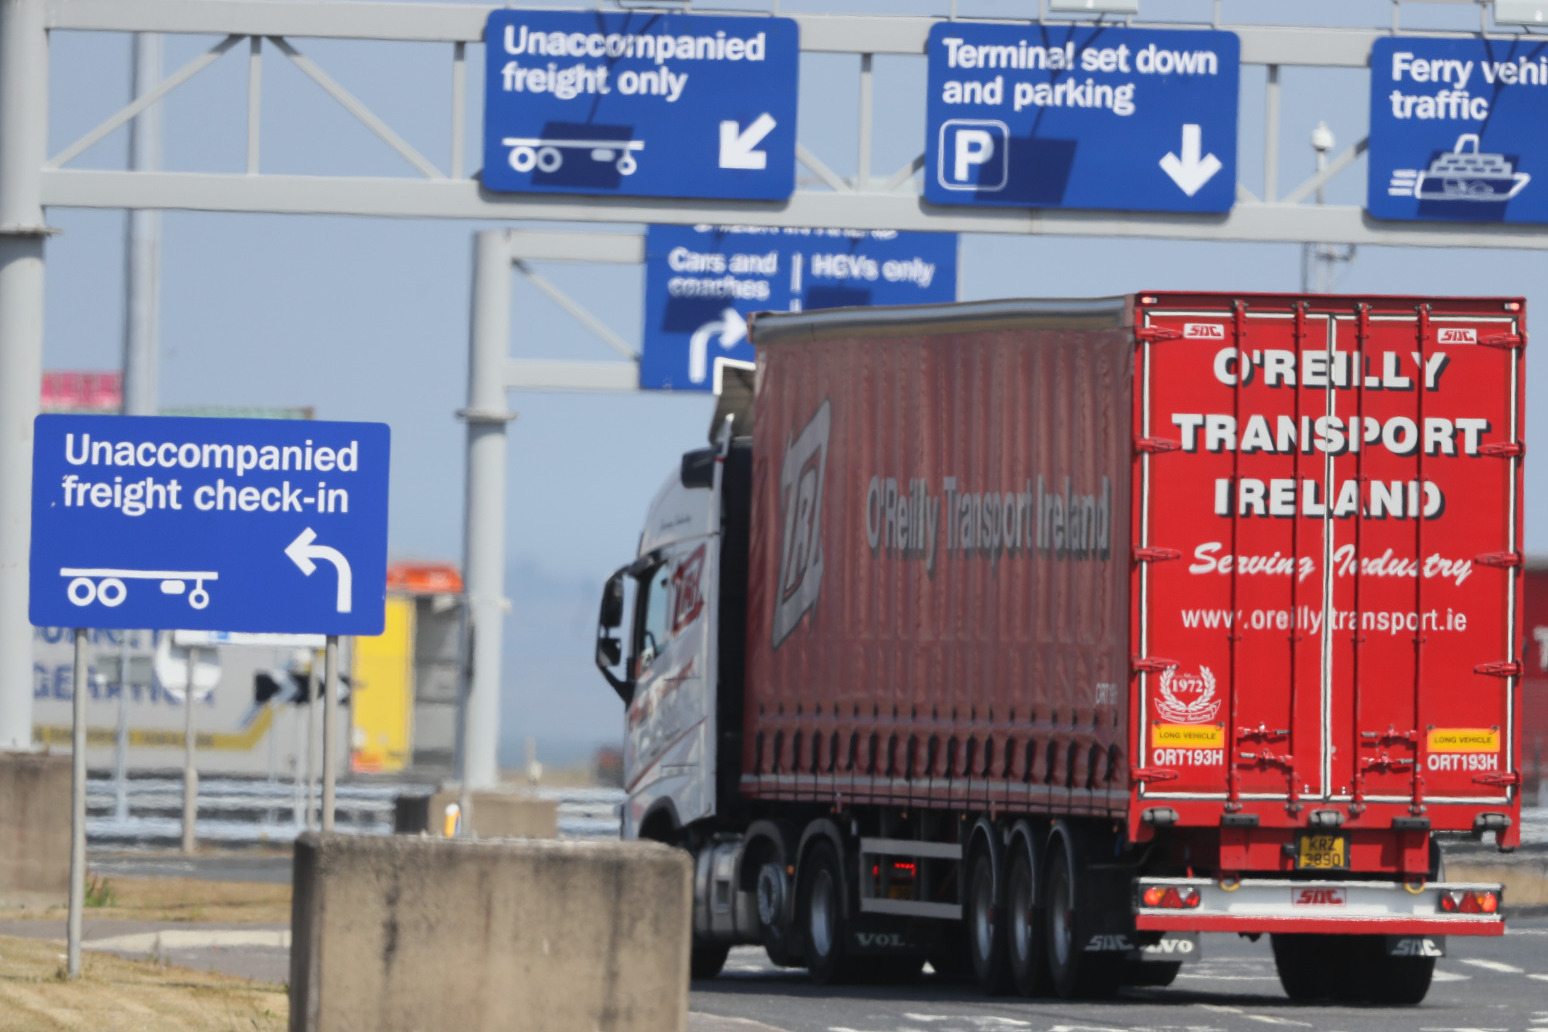 New plans for checks on goods entering NI will require ‘enhanced facilities’ 